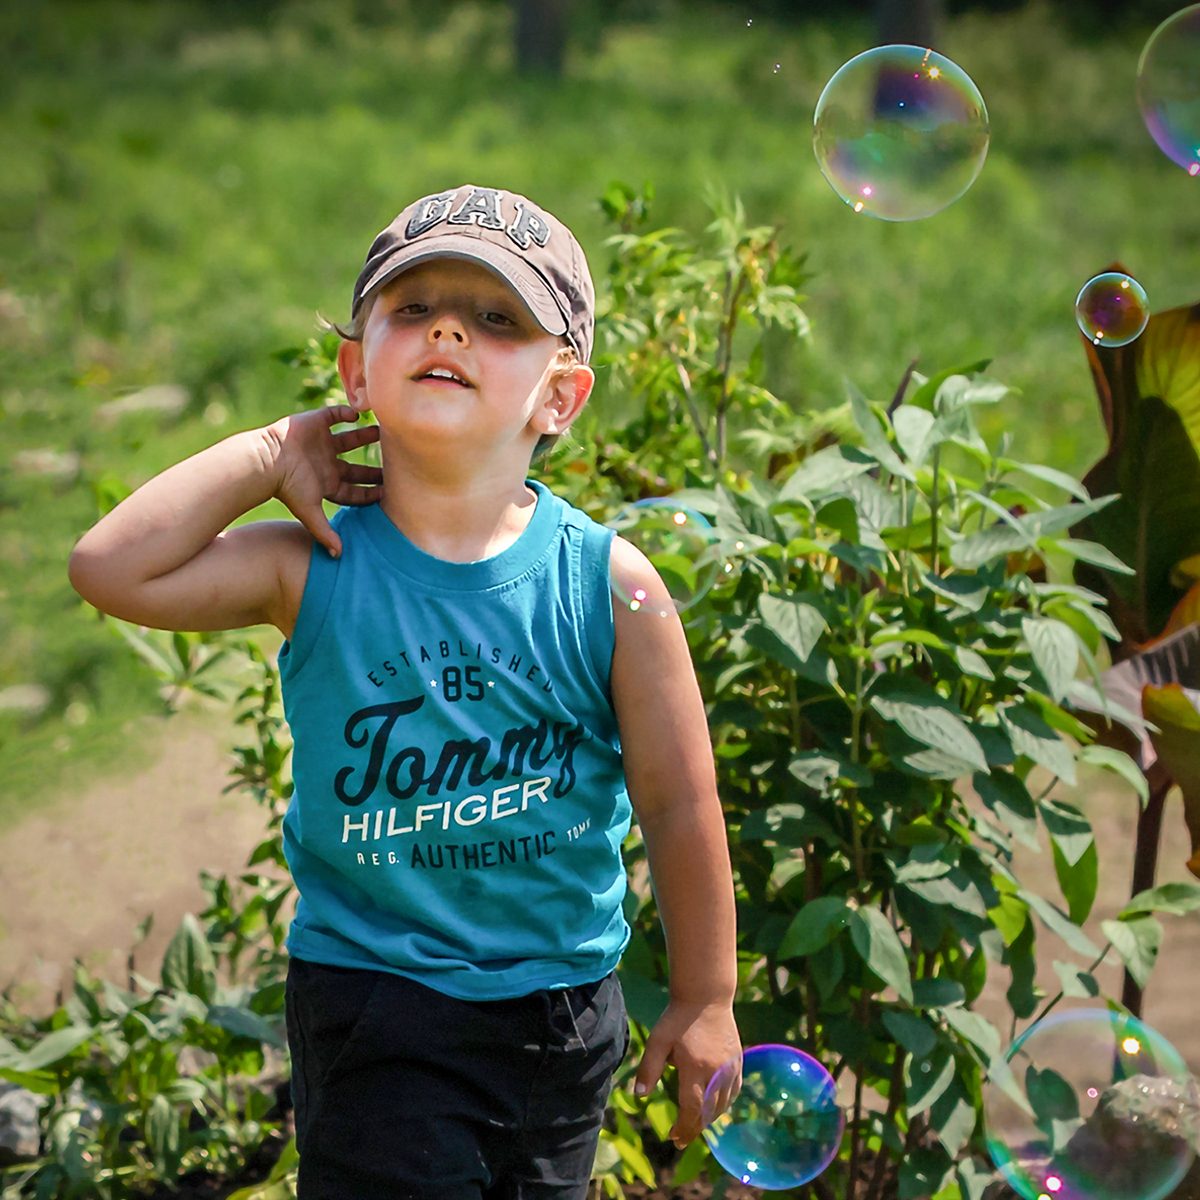 In the backyard photography - boy chasing bubbles